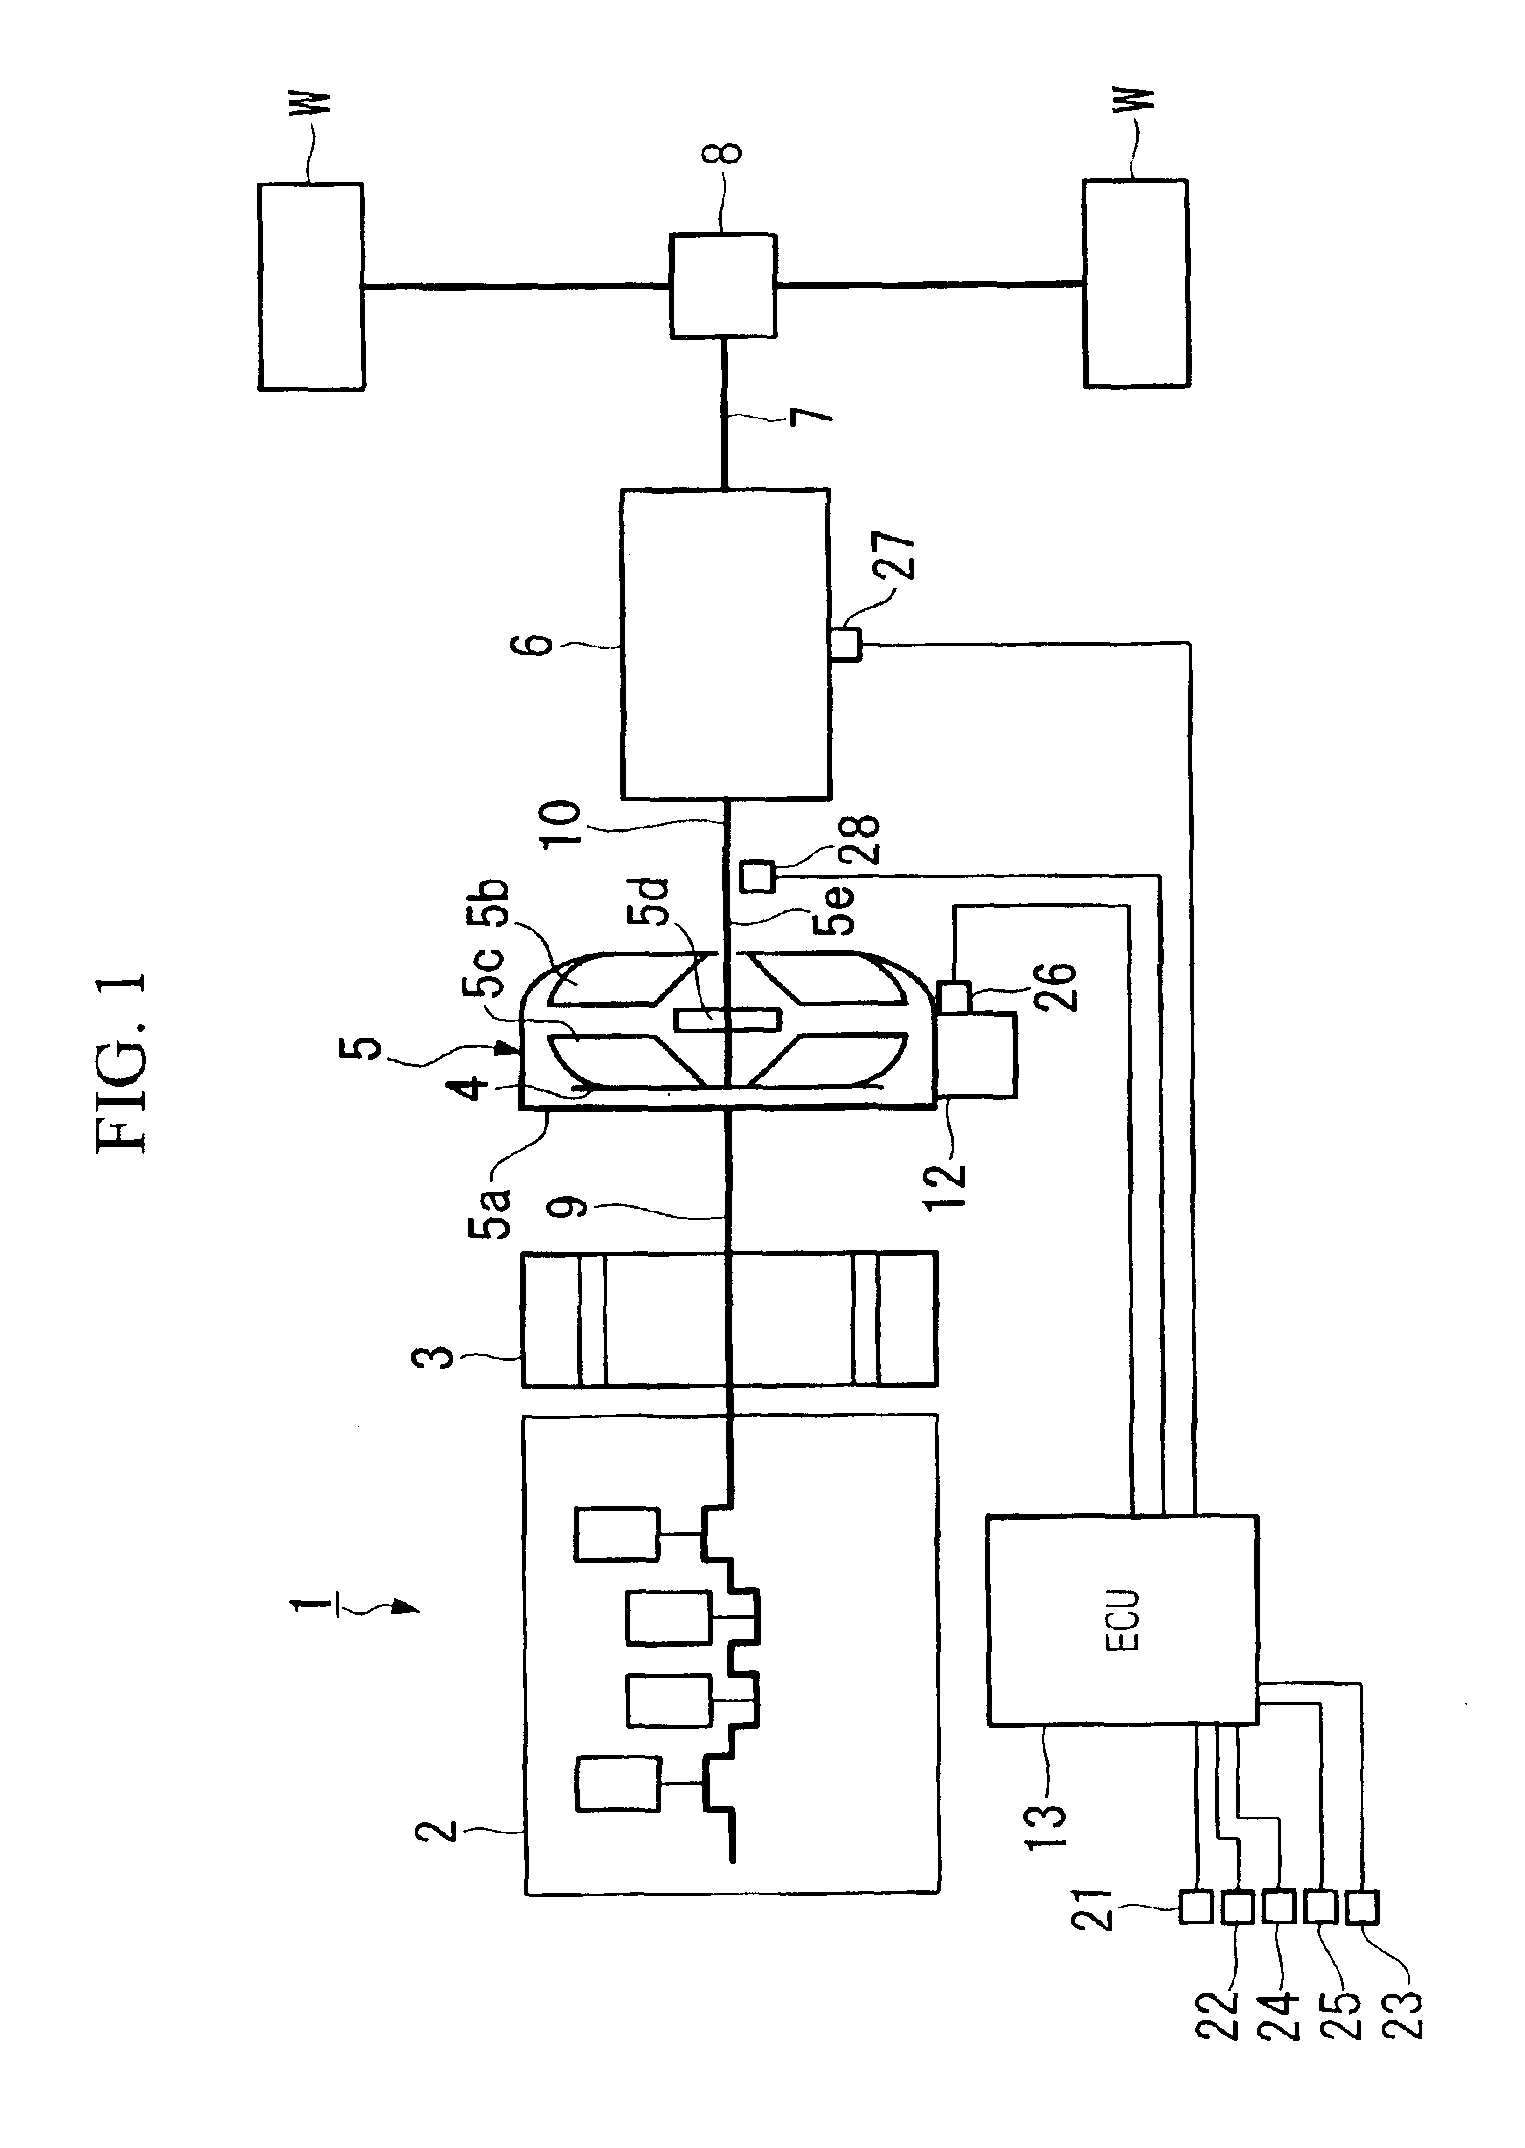 Driving power control devices for hybrid vehicle